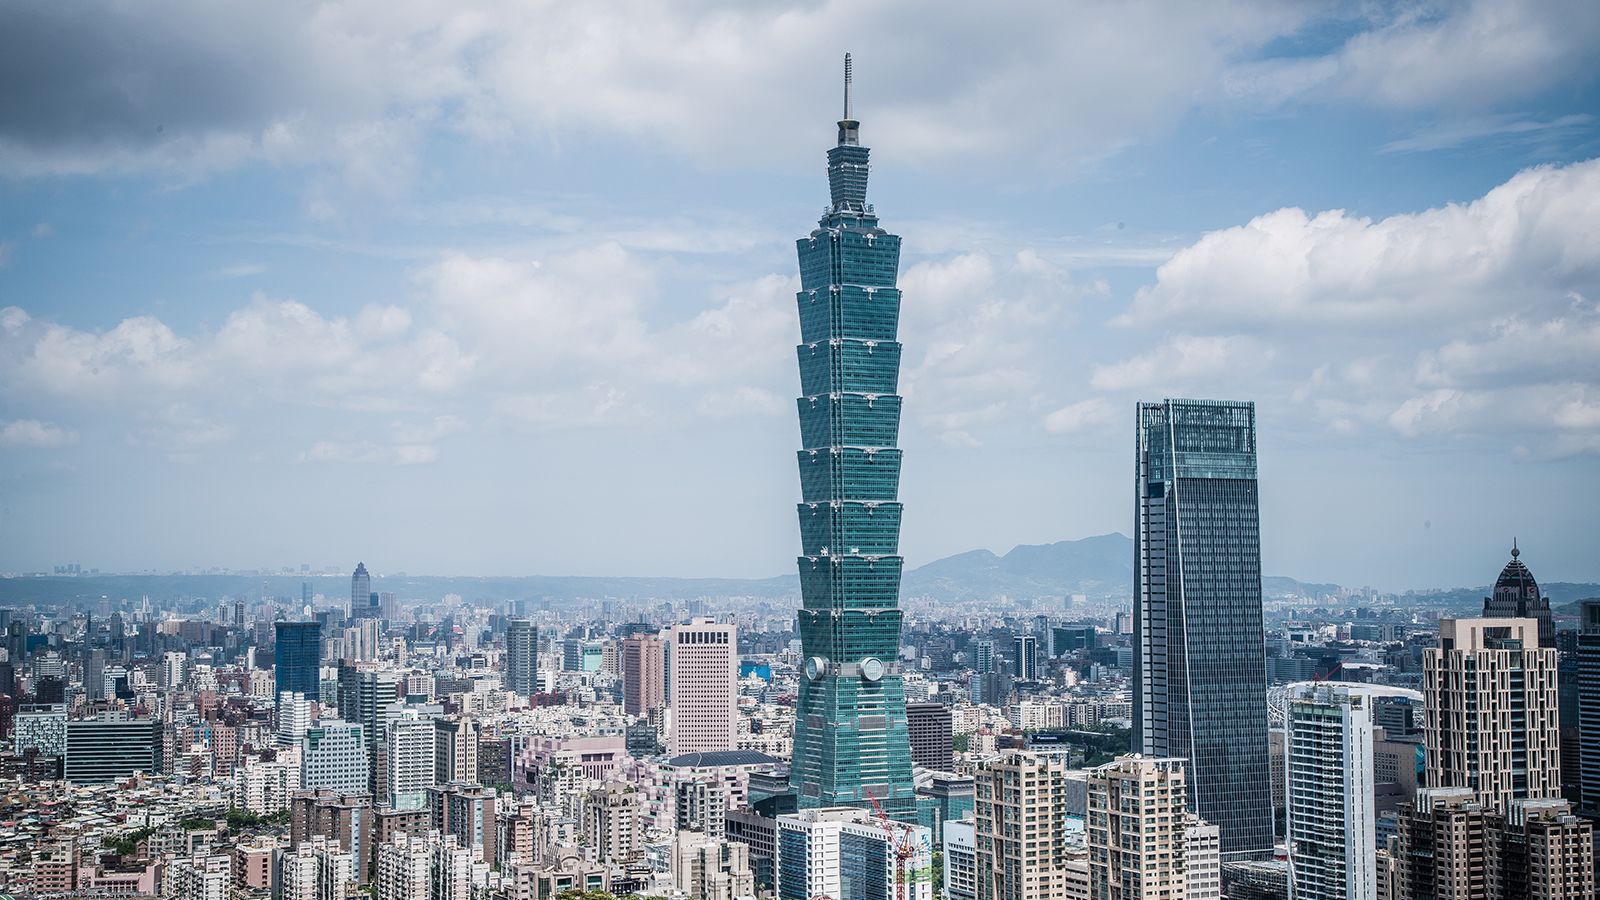 How does Taipei 101, the tallest skyscraper in Taiwan, resist earthquakes?